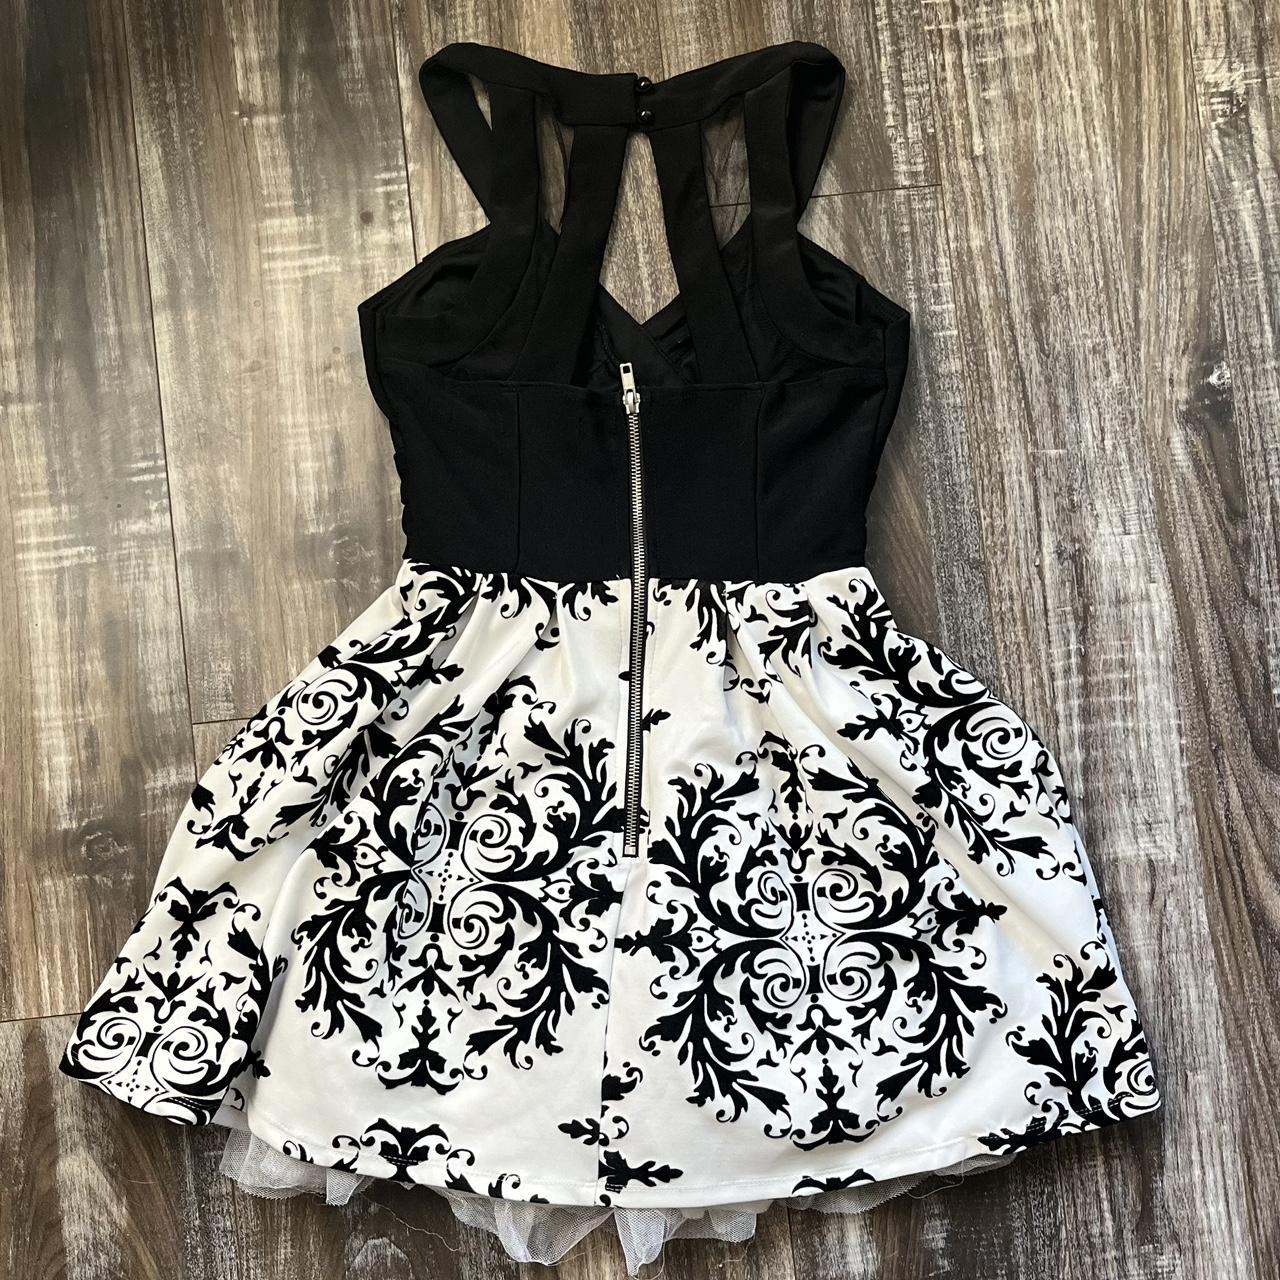 Crystal Doll Women's Black and White Dress (4)